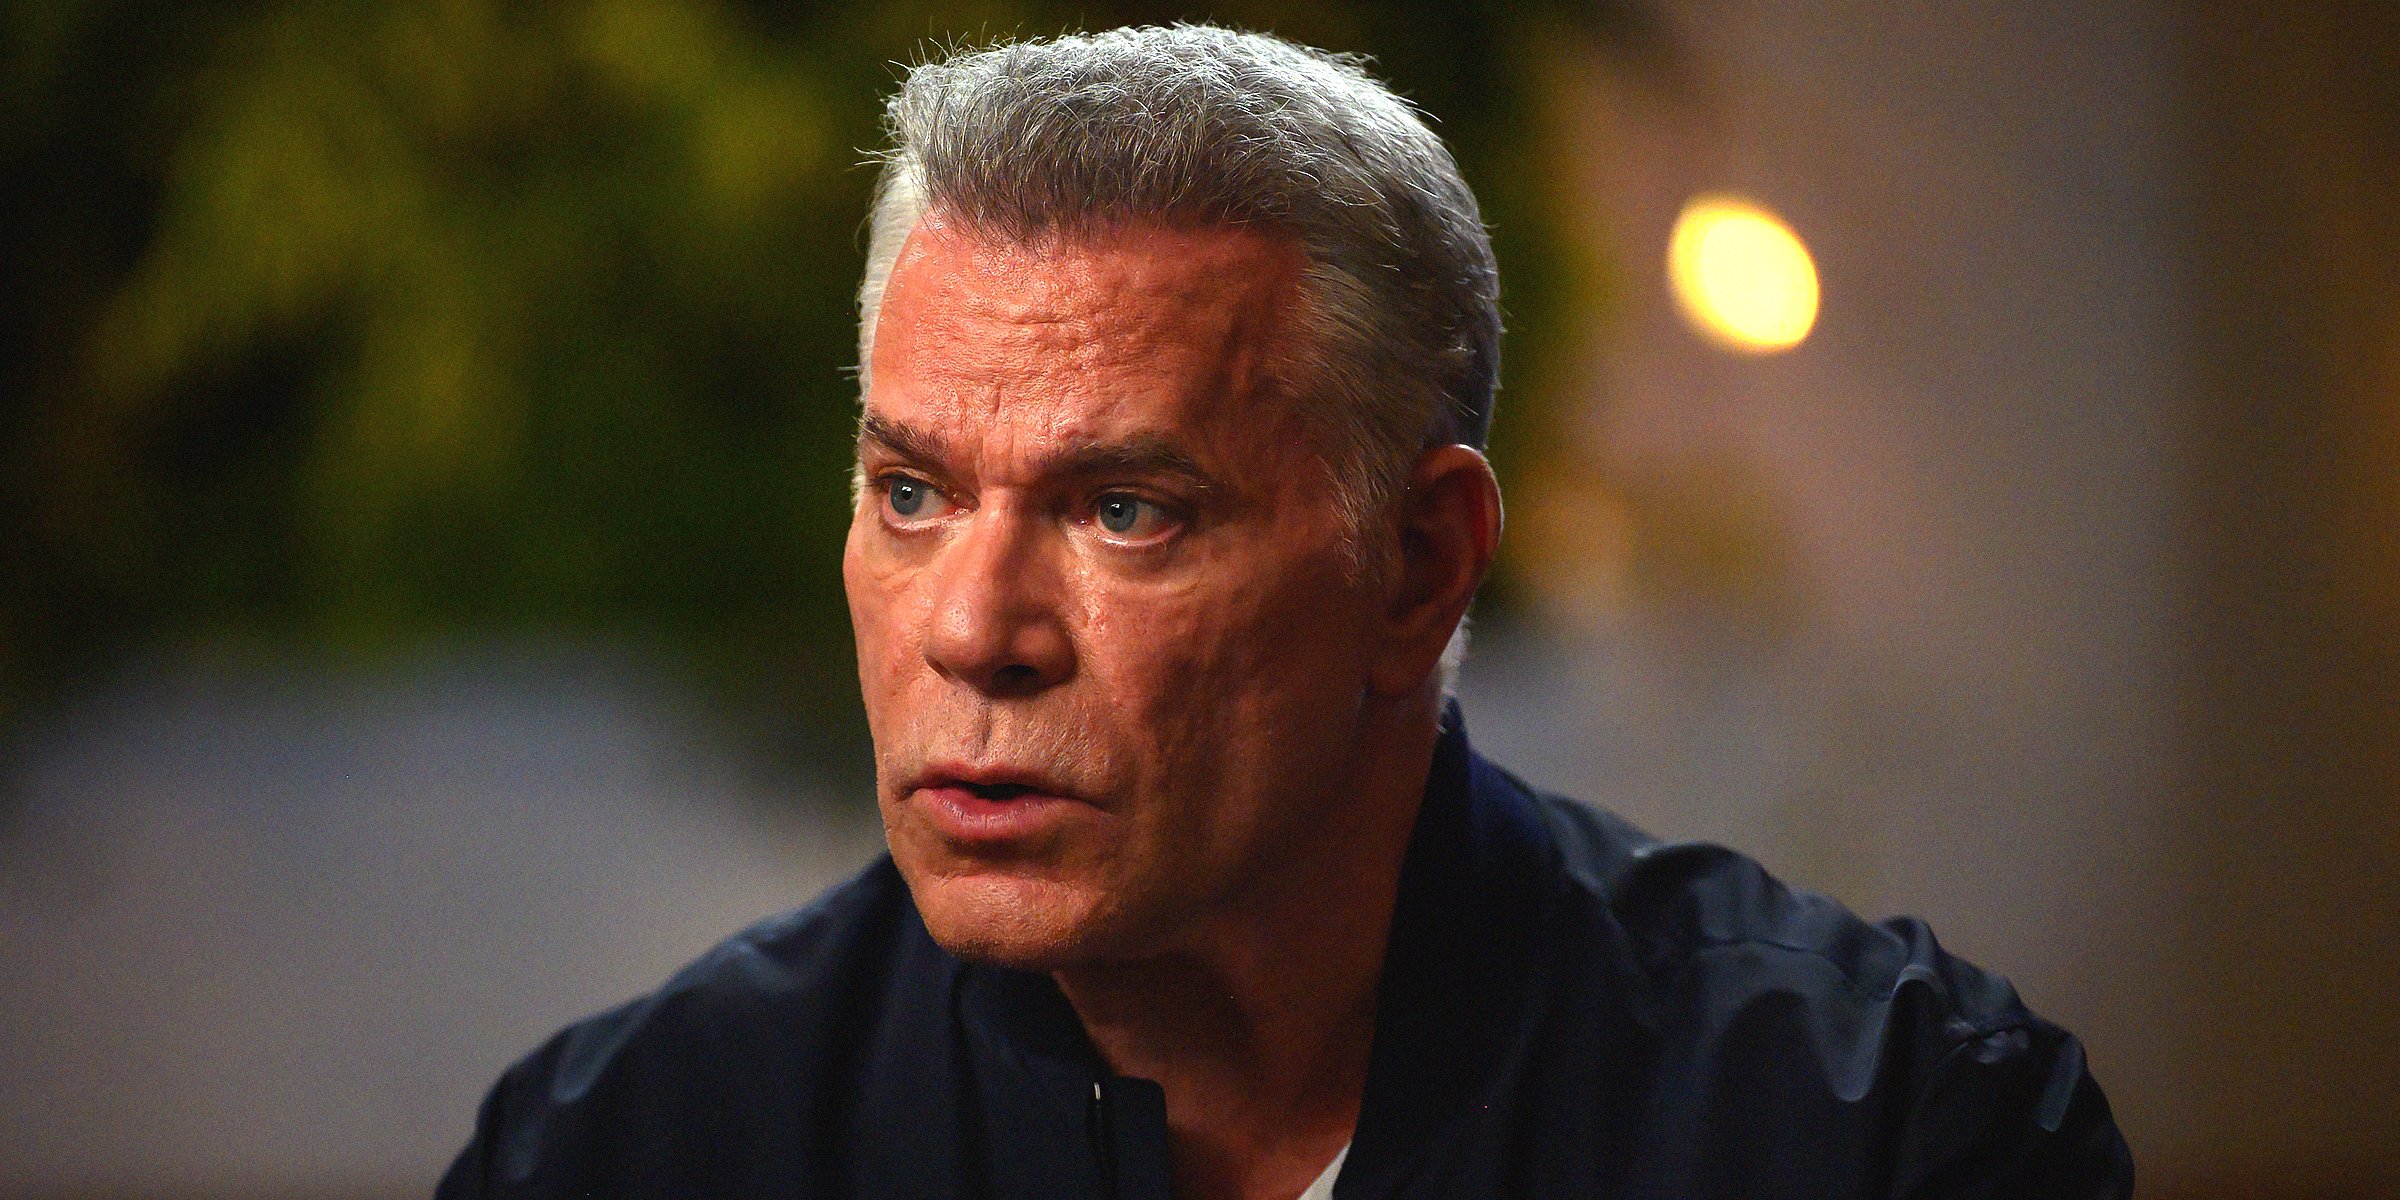 Ray Liotta | Source: Getty Images